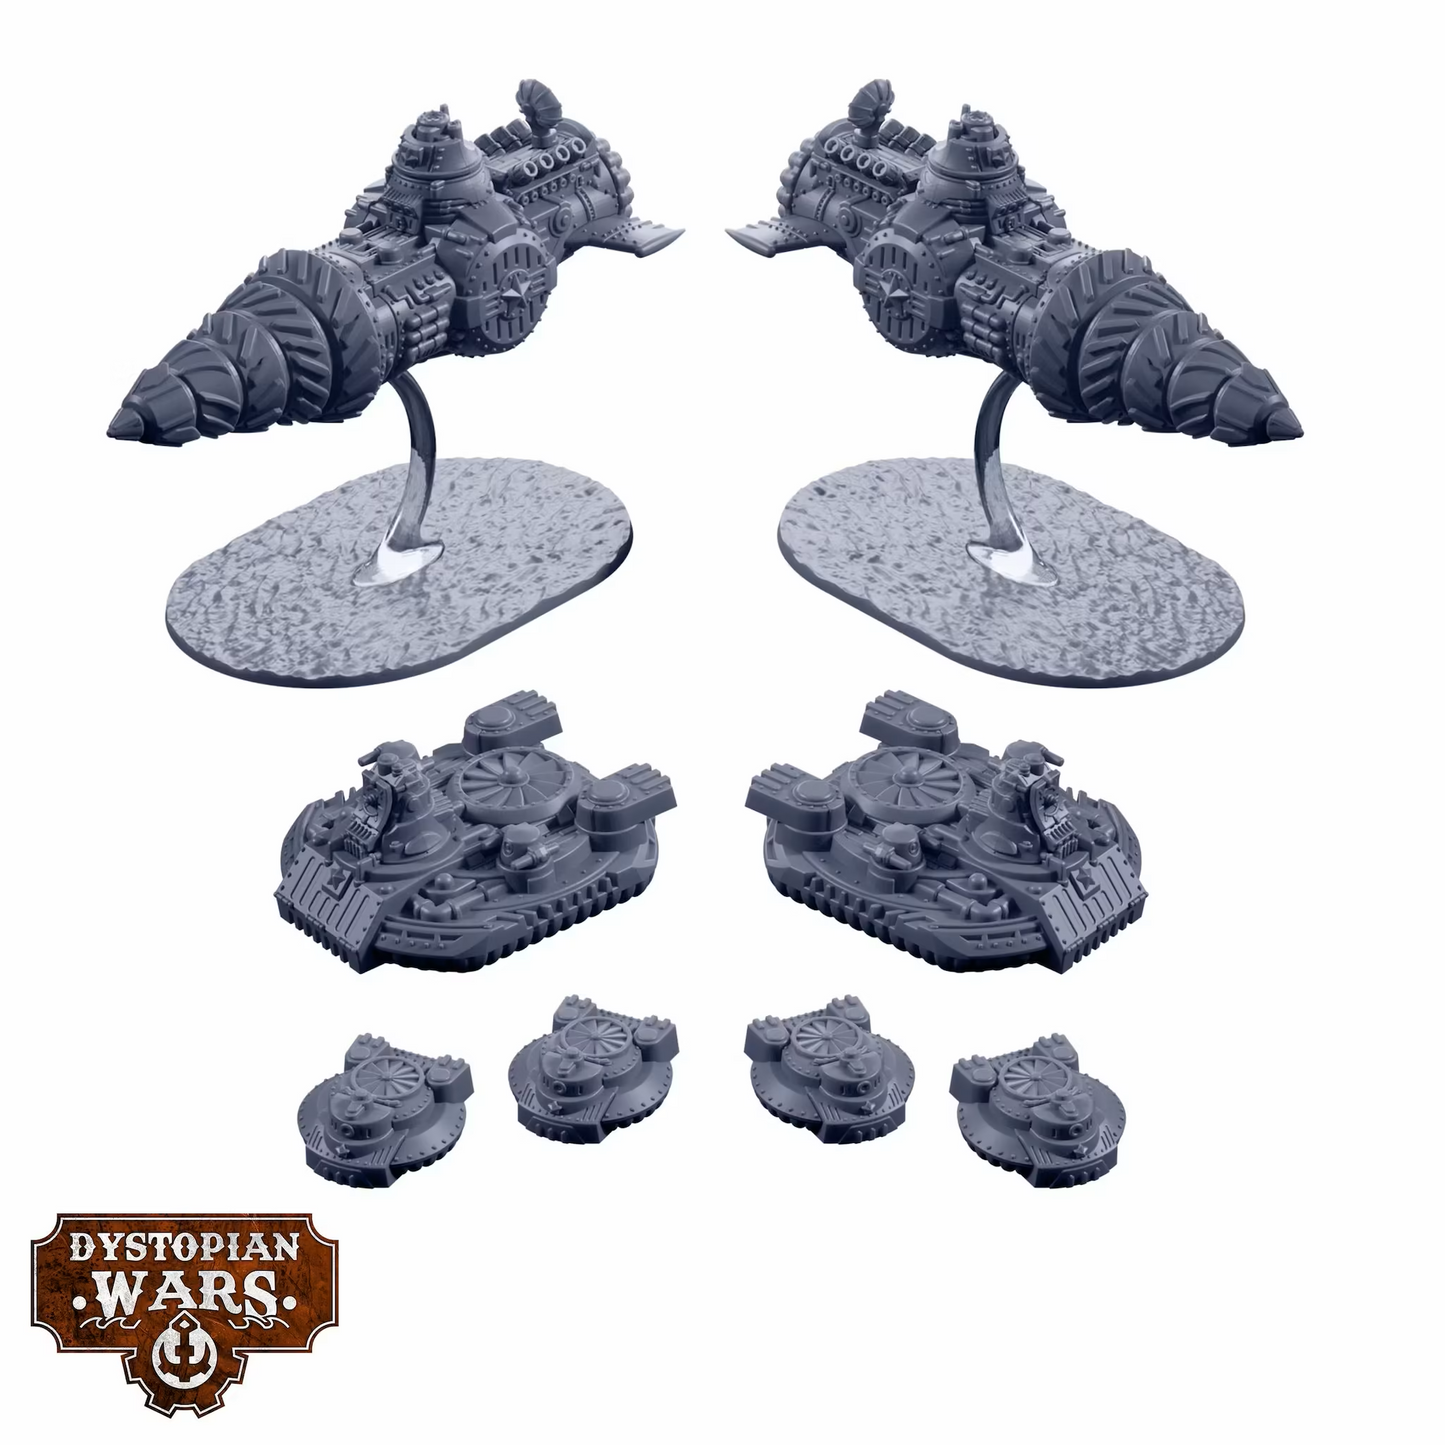 Dystopian Wars The Commonwealth Advanced Squadrons